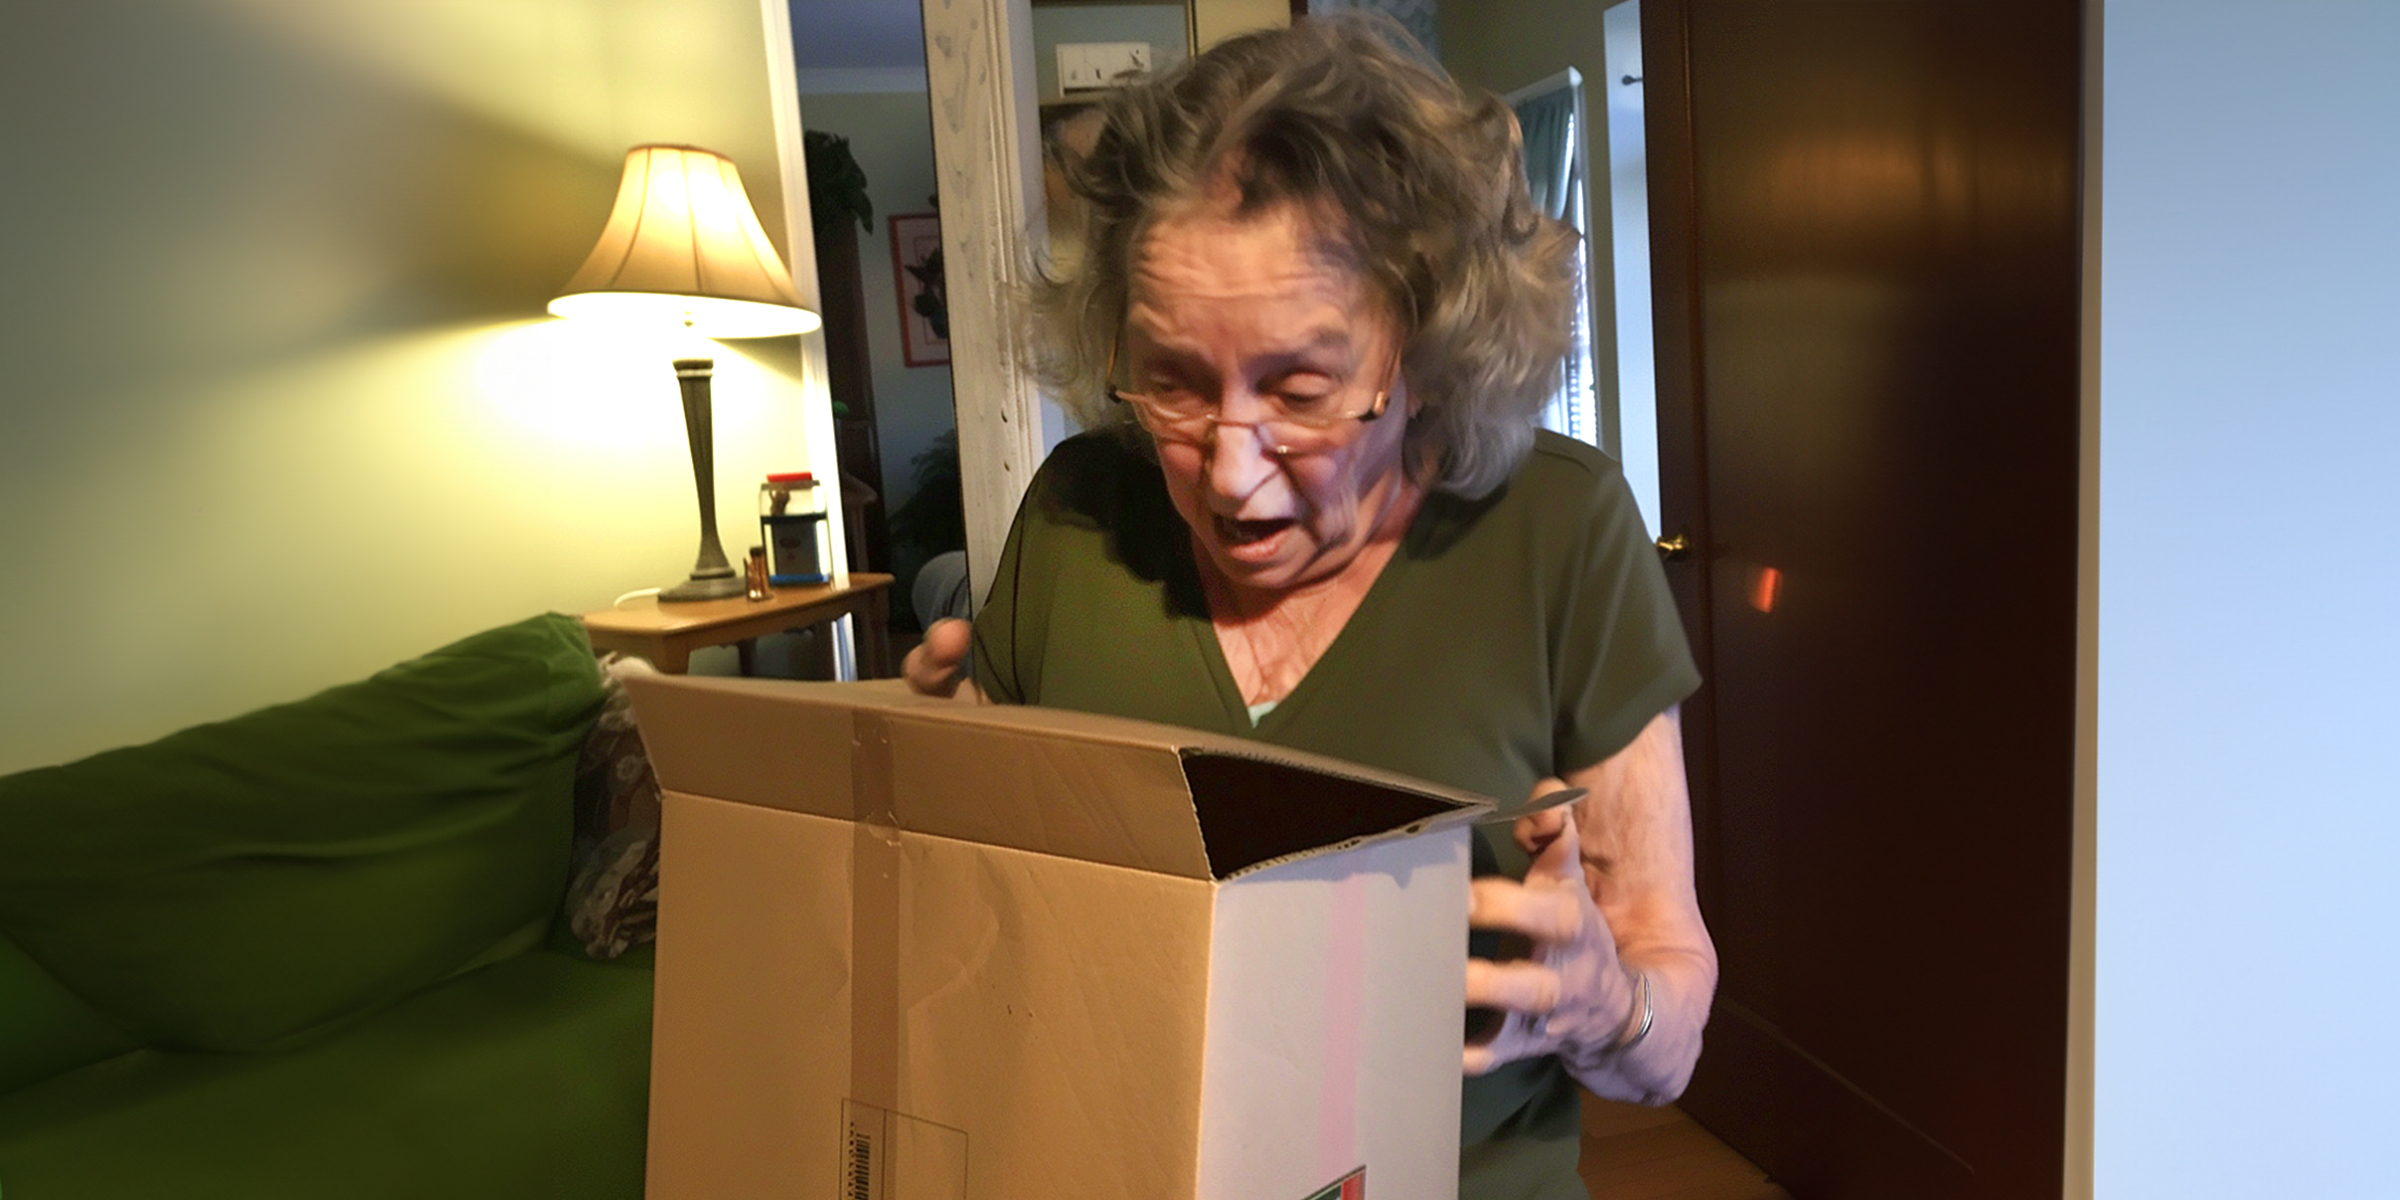 A shocked woman looking inside a box | Source: Amomama